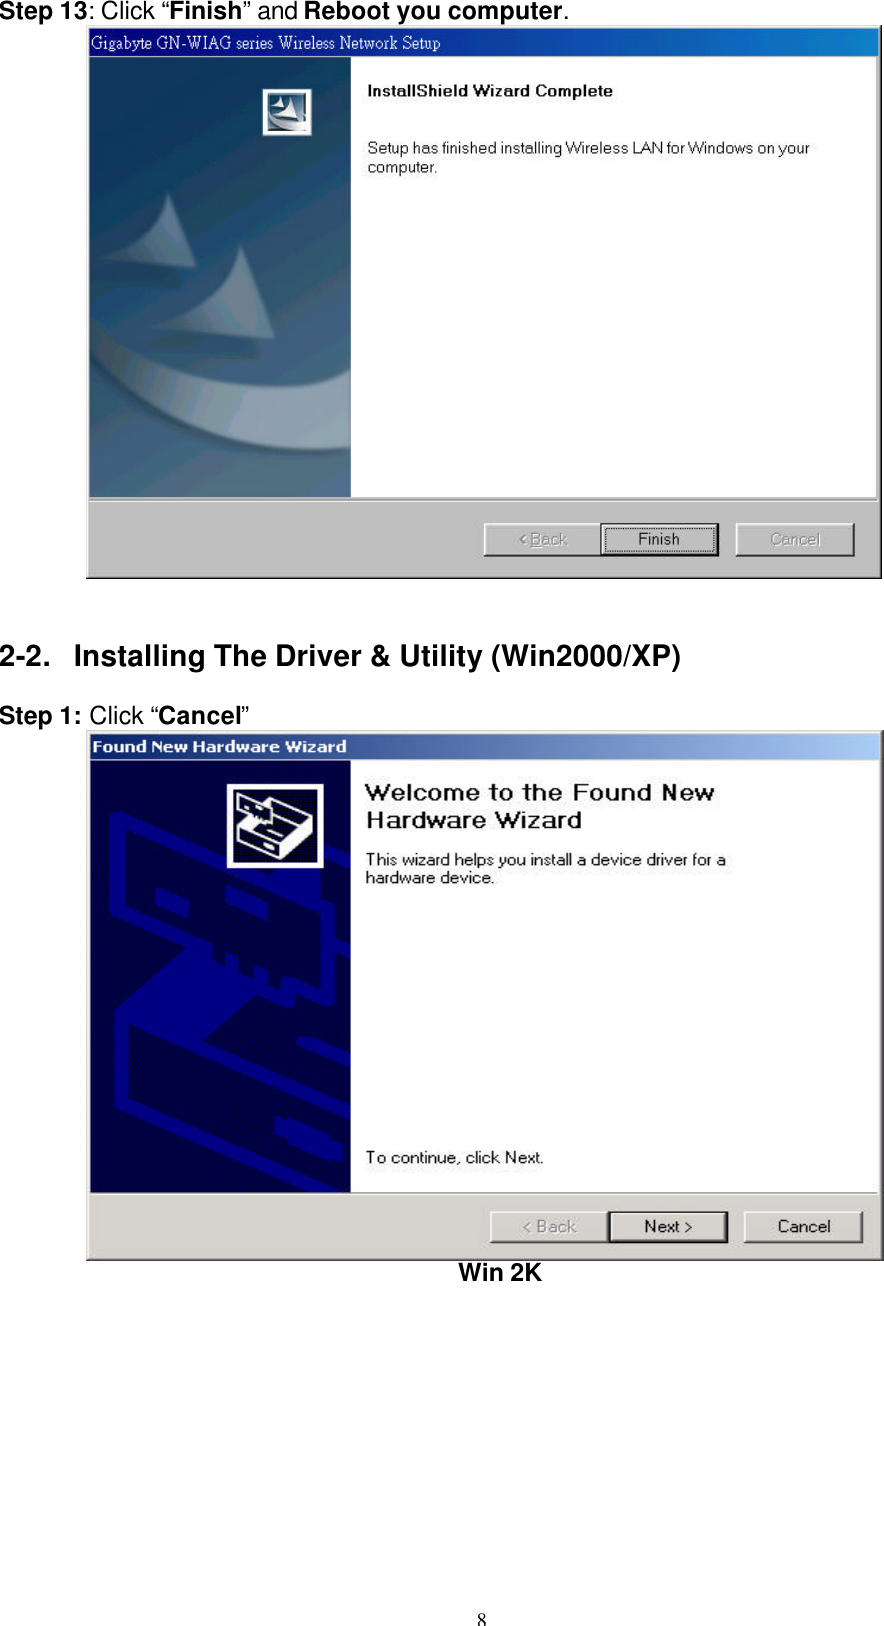 8  Step 13: Click “Finish” and Reboot you computer.            2-2. Installing The Driver &amp; Utility (Win2000/XP)  Step 1: Click “Cancel”          Win 2K  